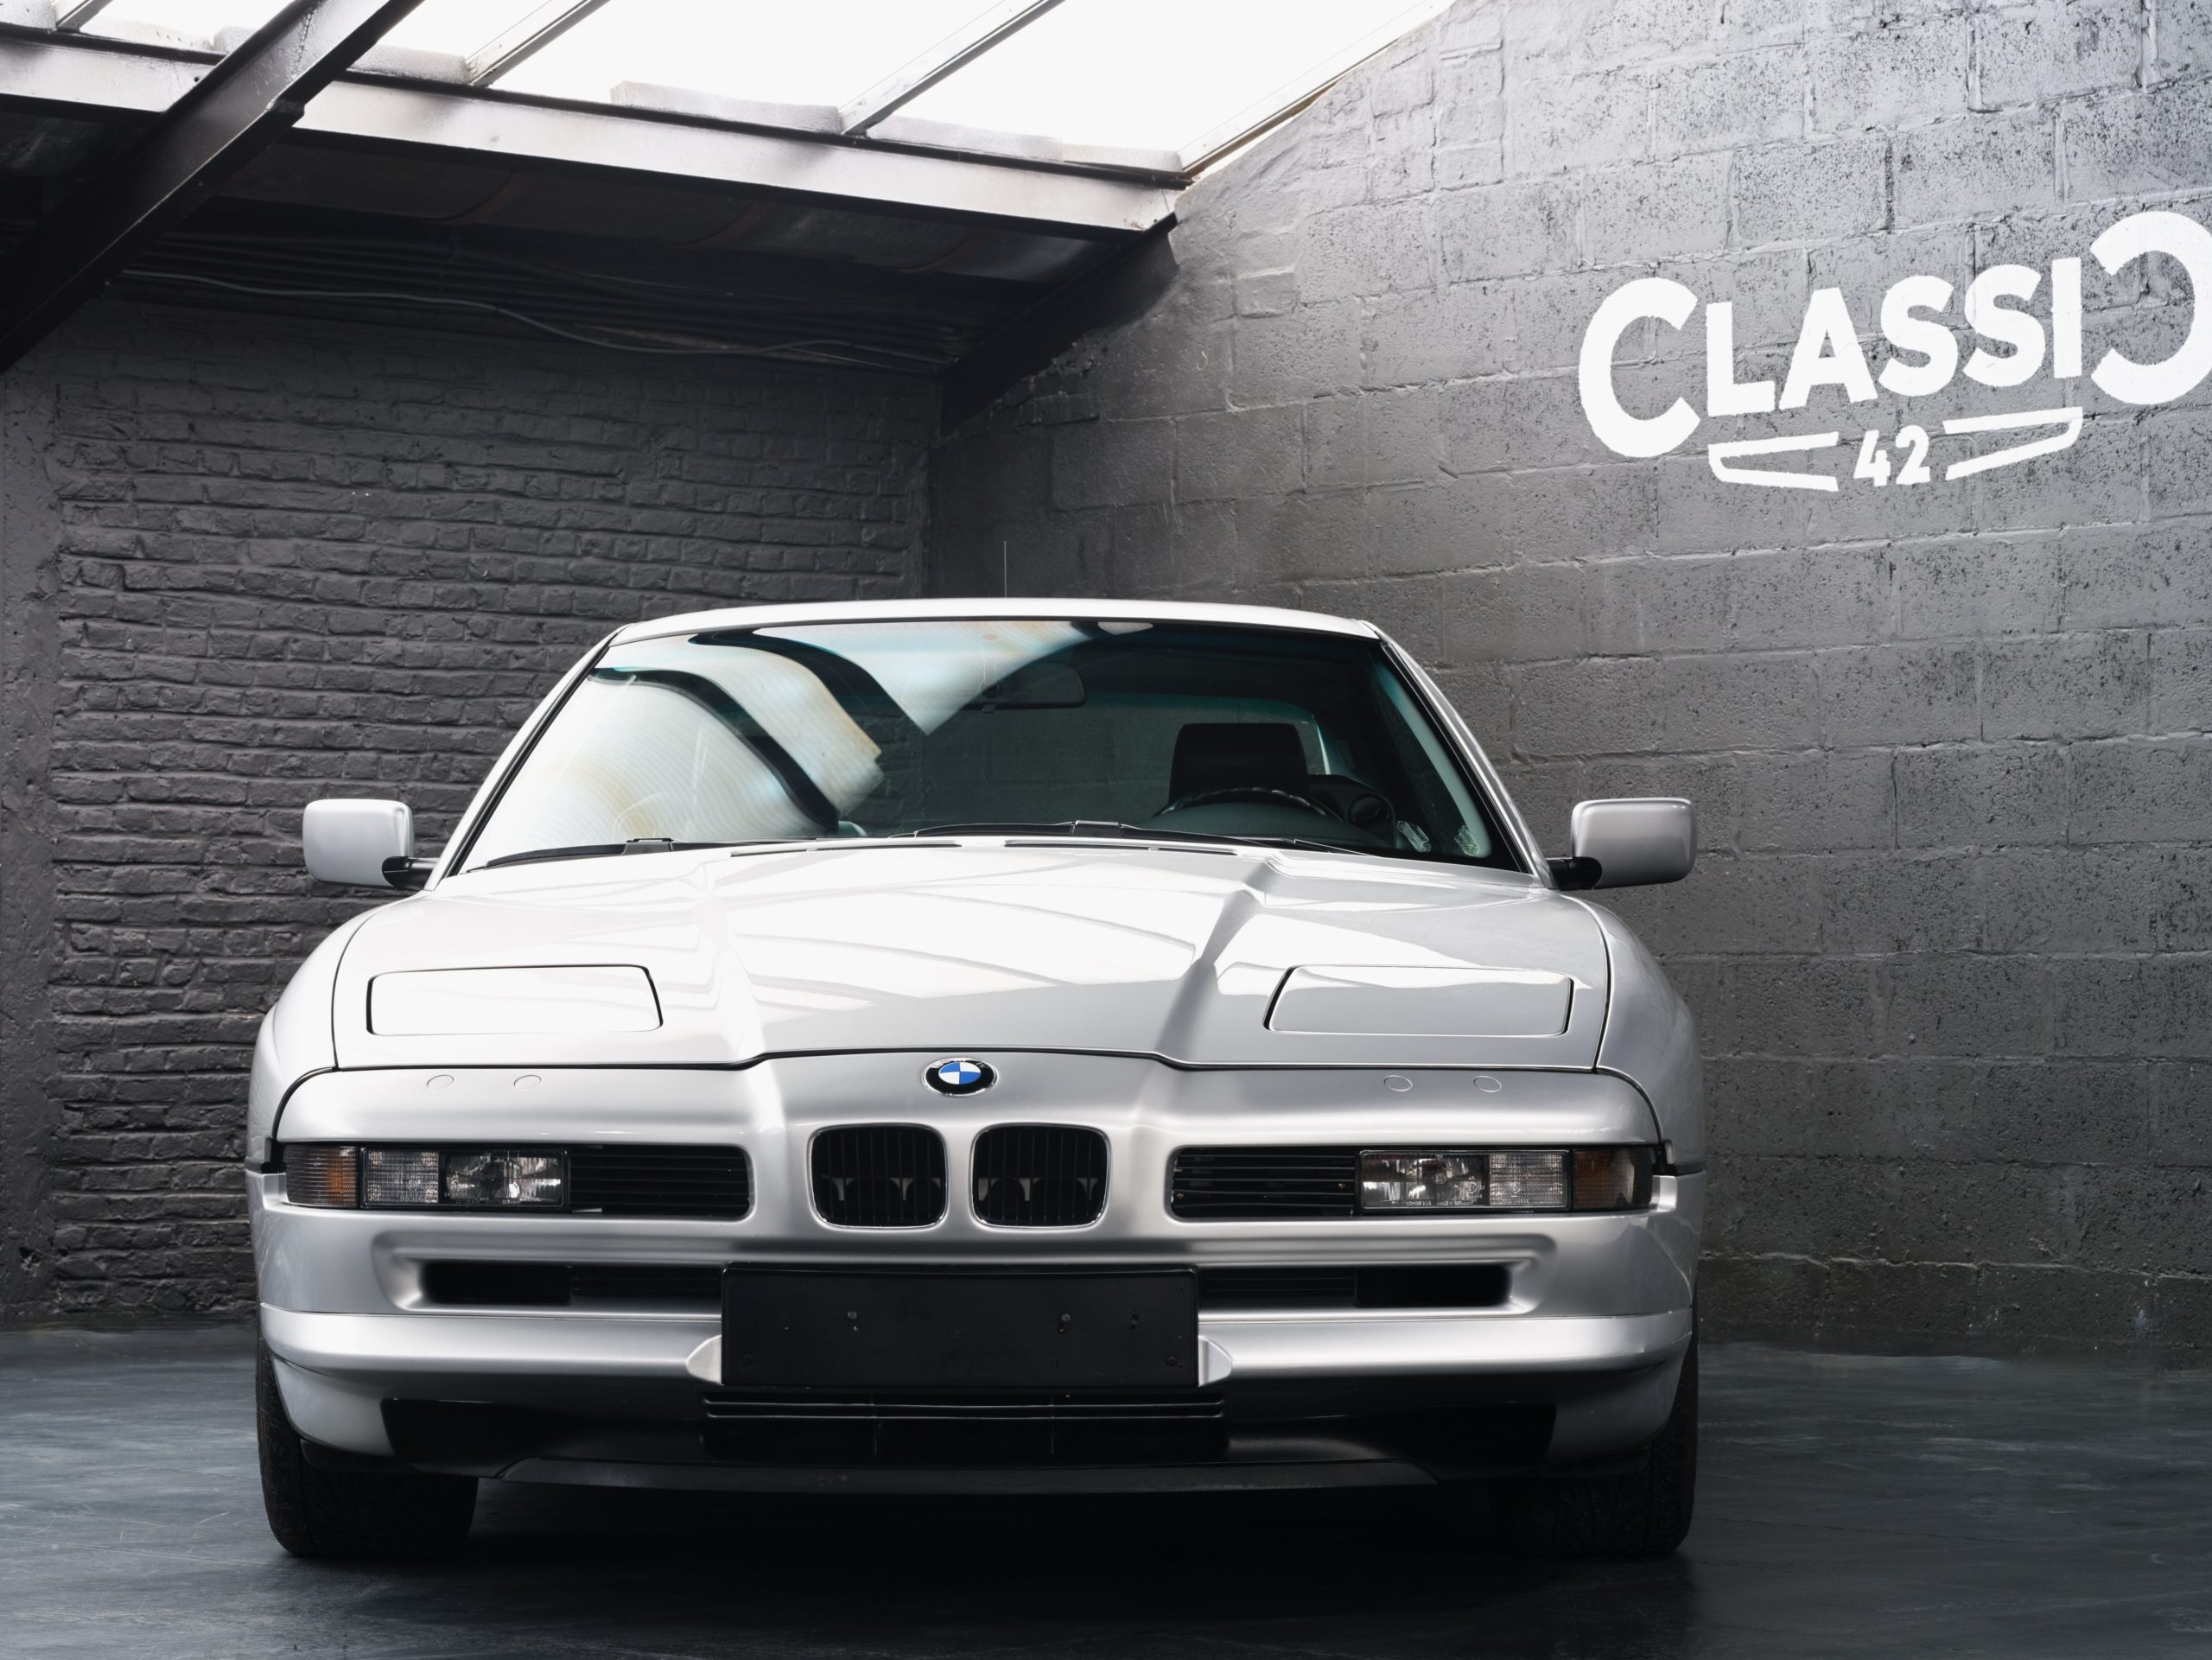 front view of a 1991 BMW 850i 6 speed manual for sale with Classic 42 Belgium